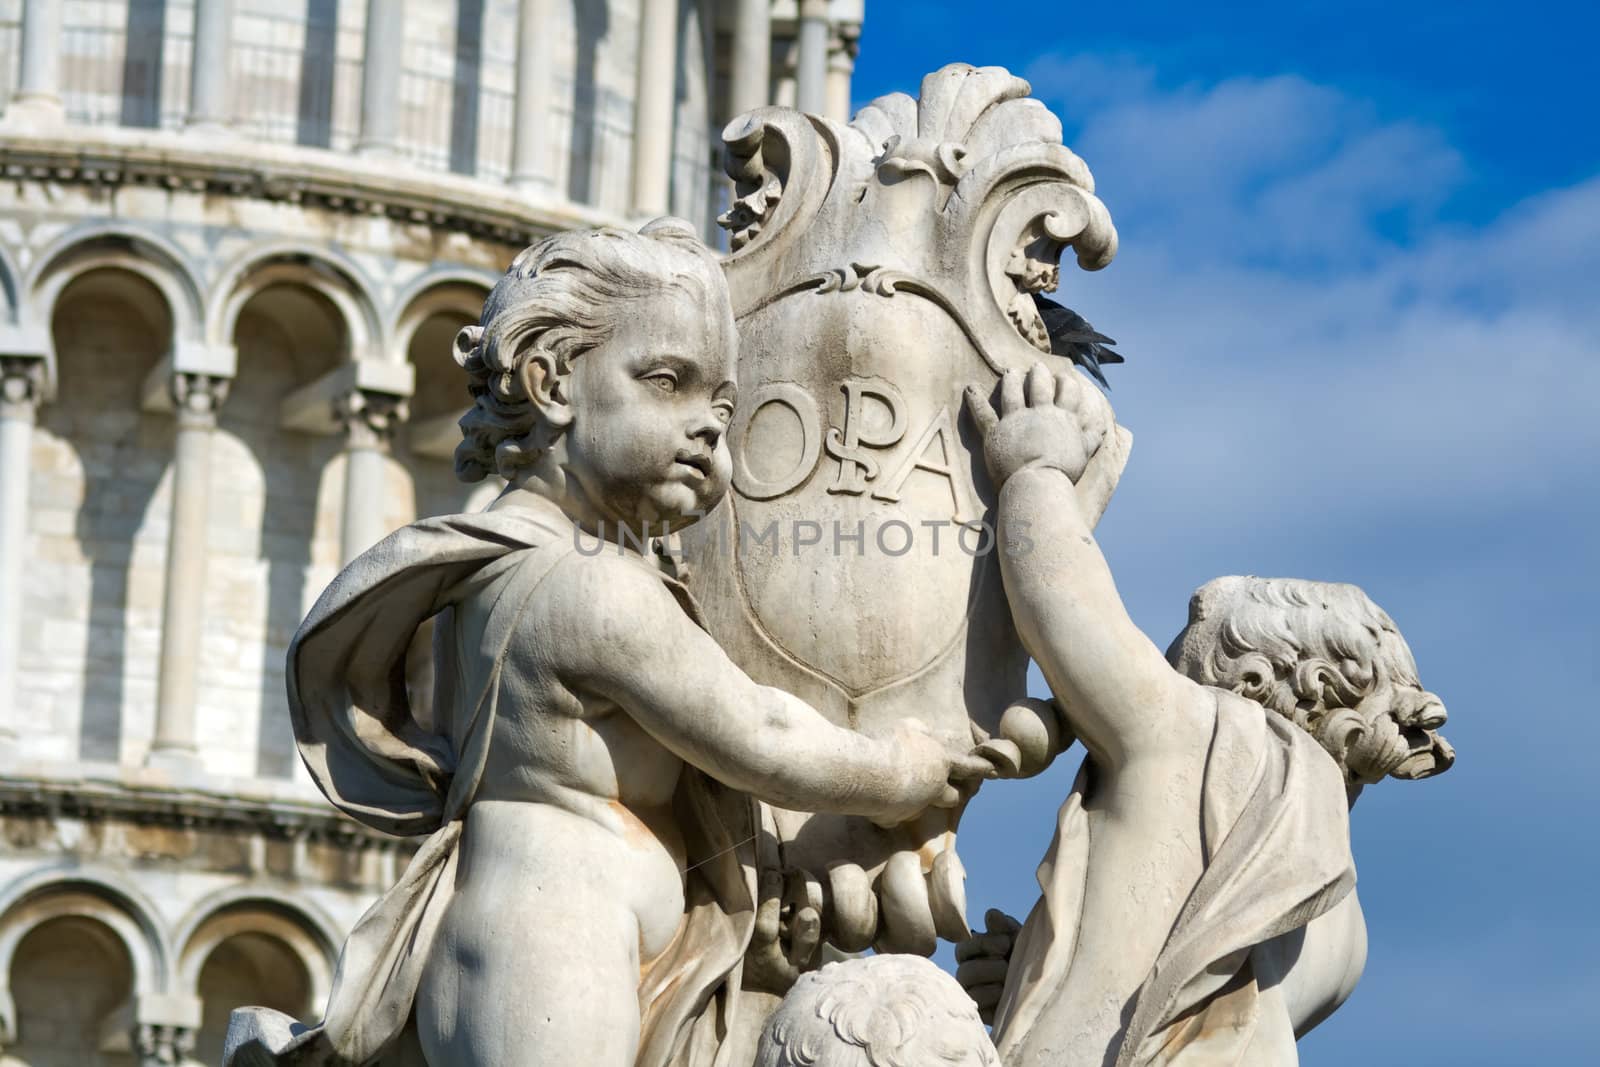 Cherub statue that sits on the Field of Miracles in Pisa Italy with the leaning tower in the background